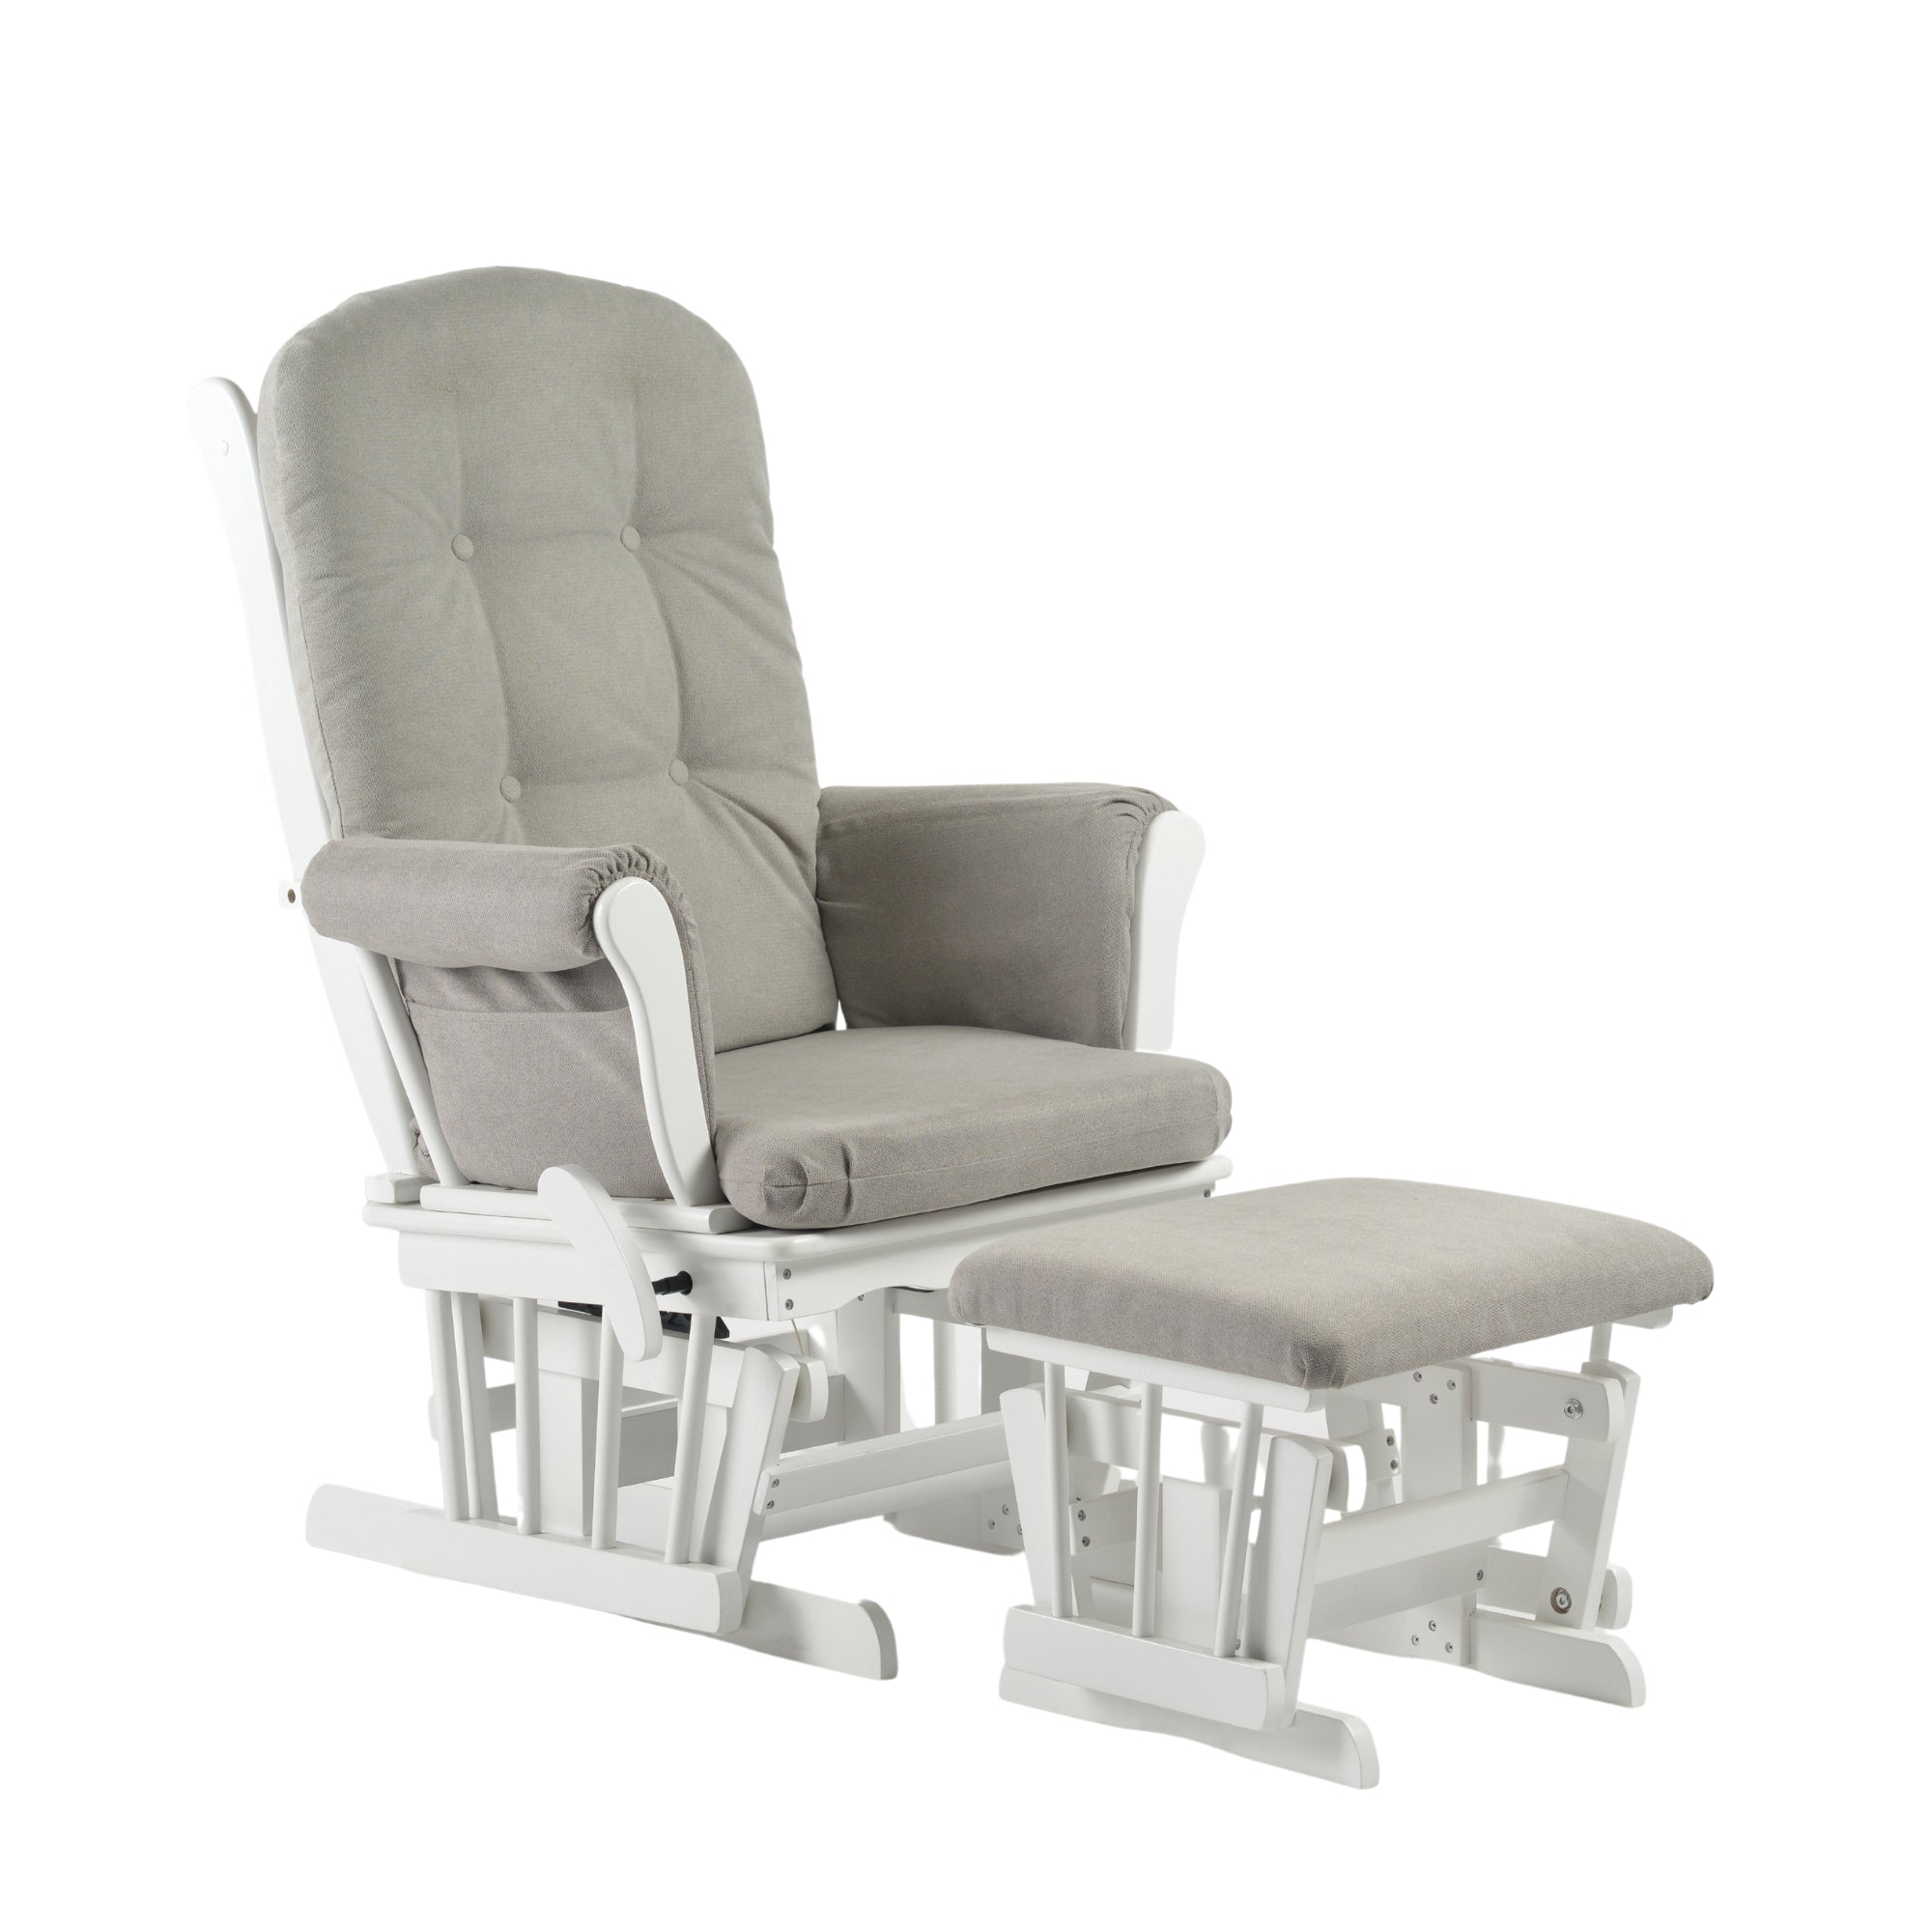 50% OFF - Kielder Nursing Chair and Footstool - Pebble Stone & White. LIMITED EDITION